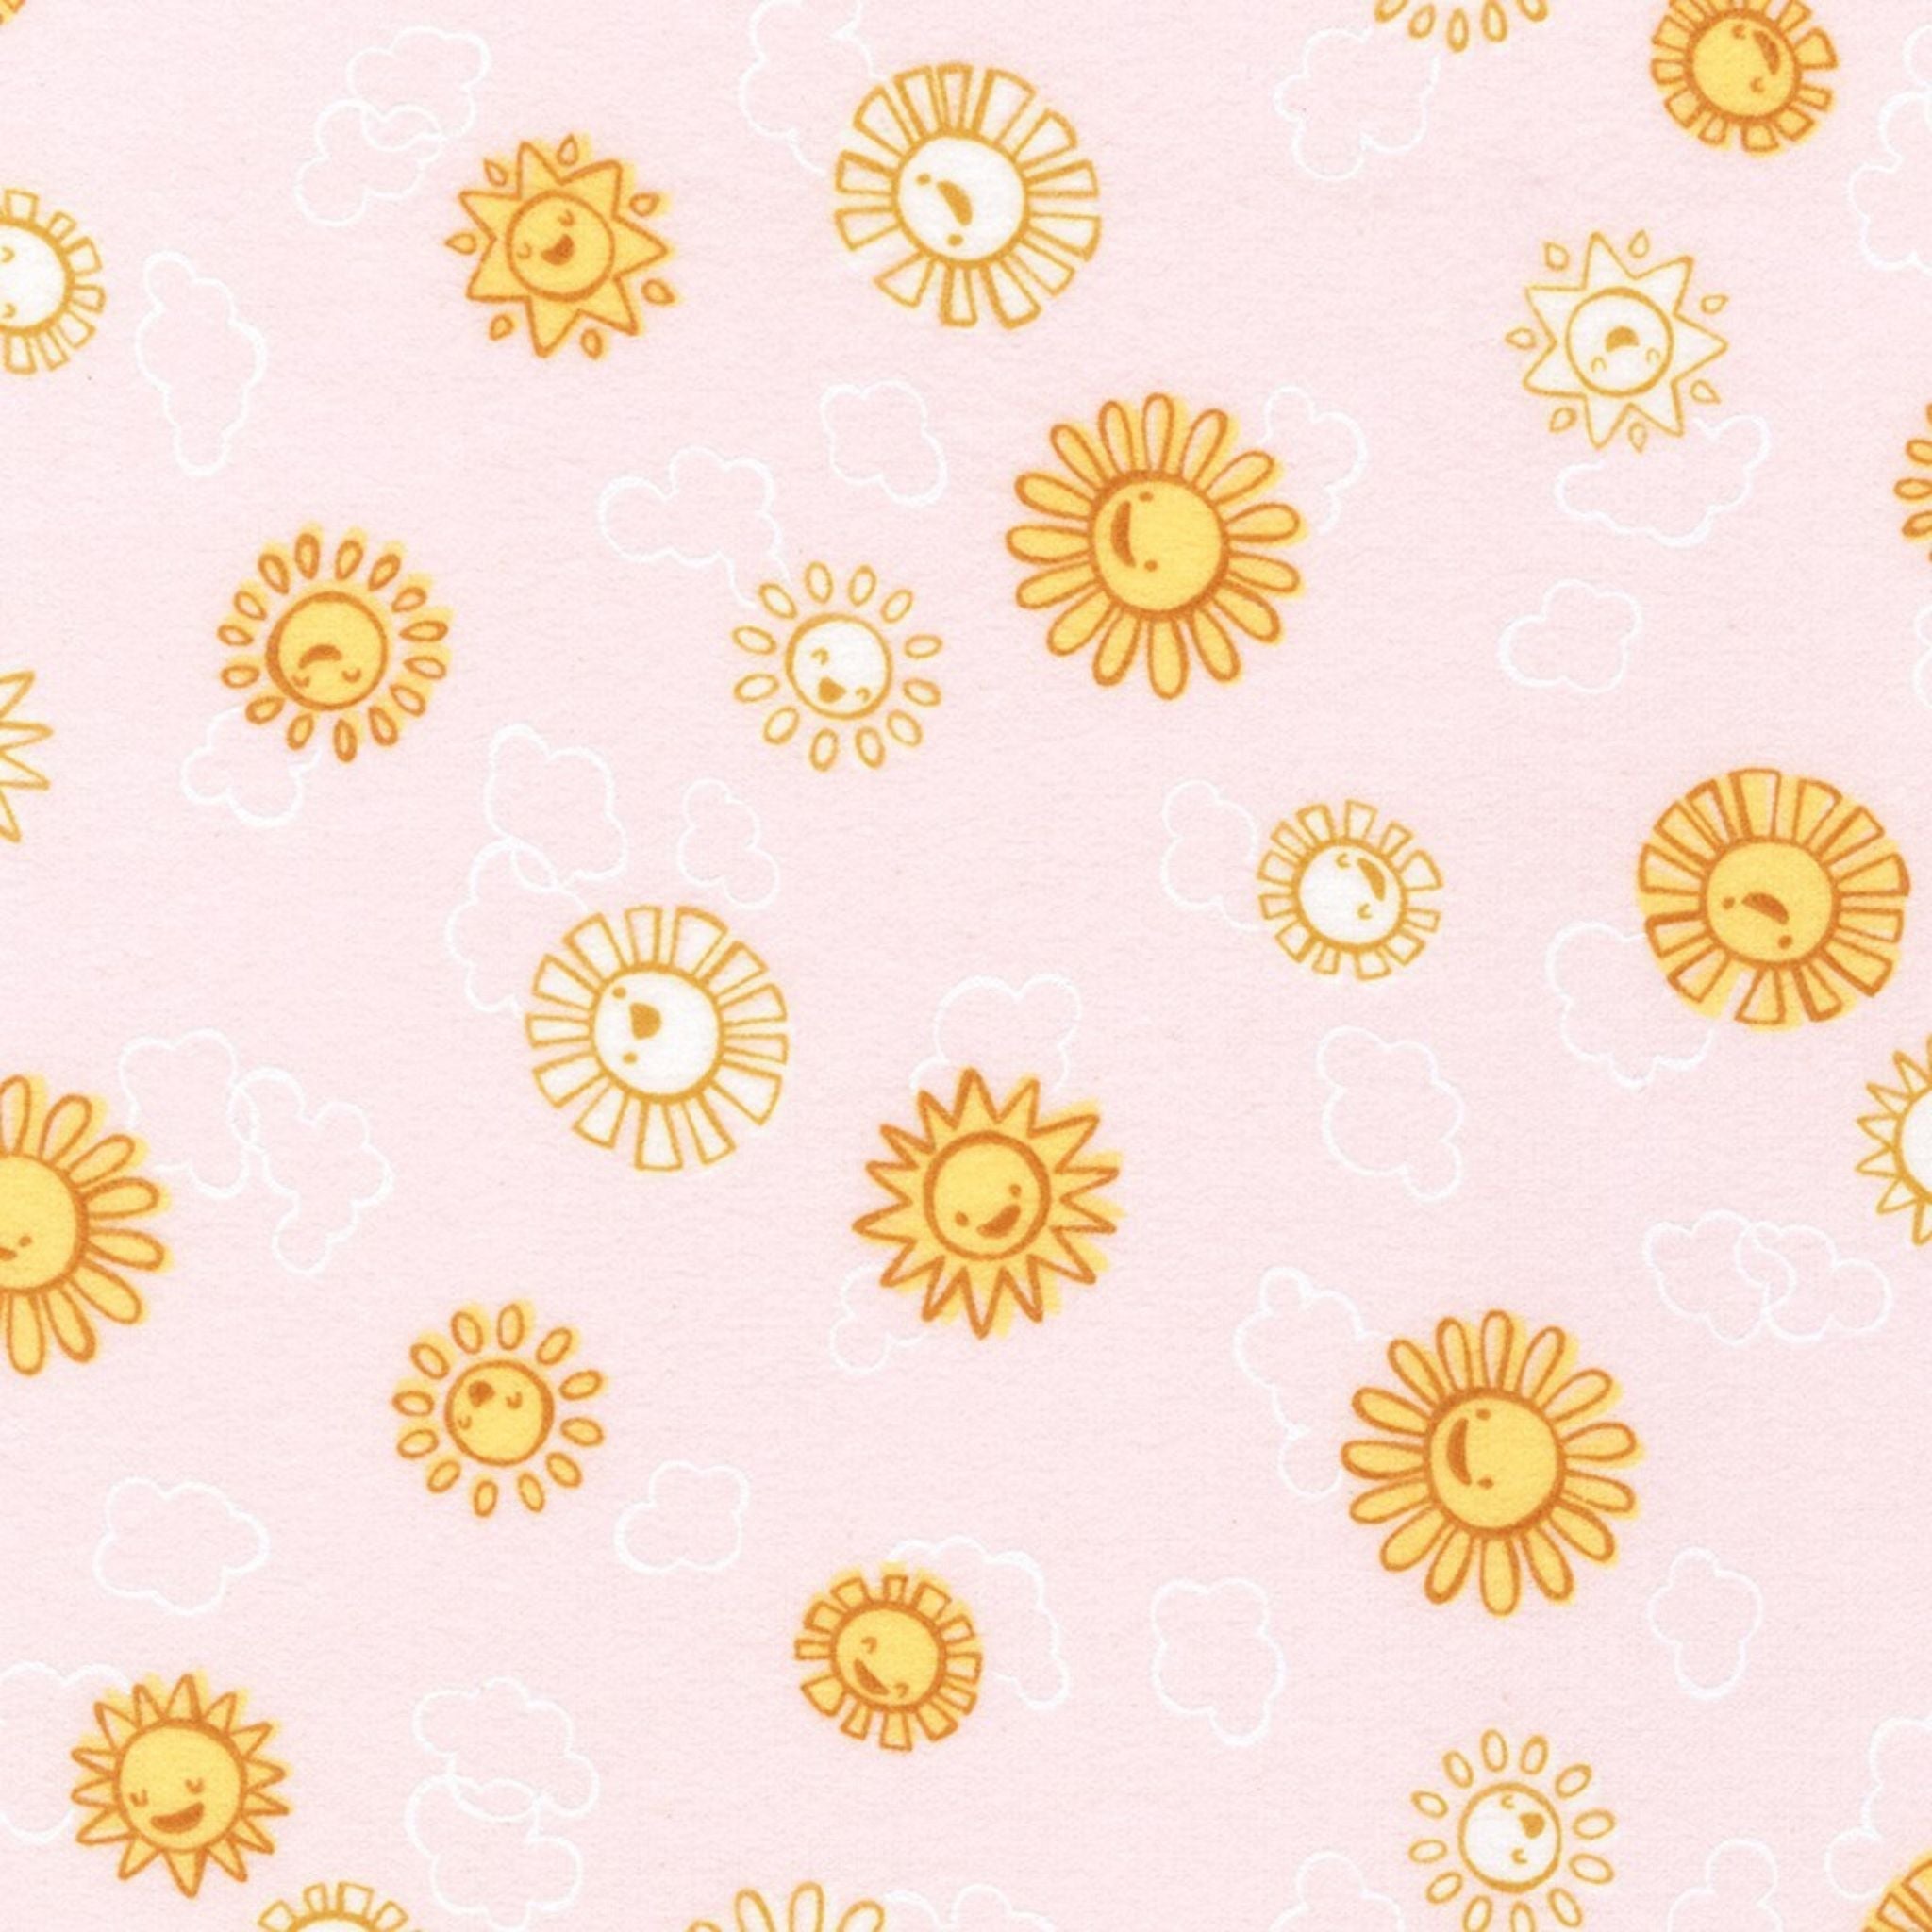 Sun smily faces on pink brushed cotton - Over the Rainbow Cozy cotton by Robert Kaufman